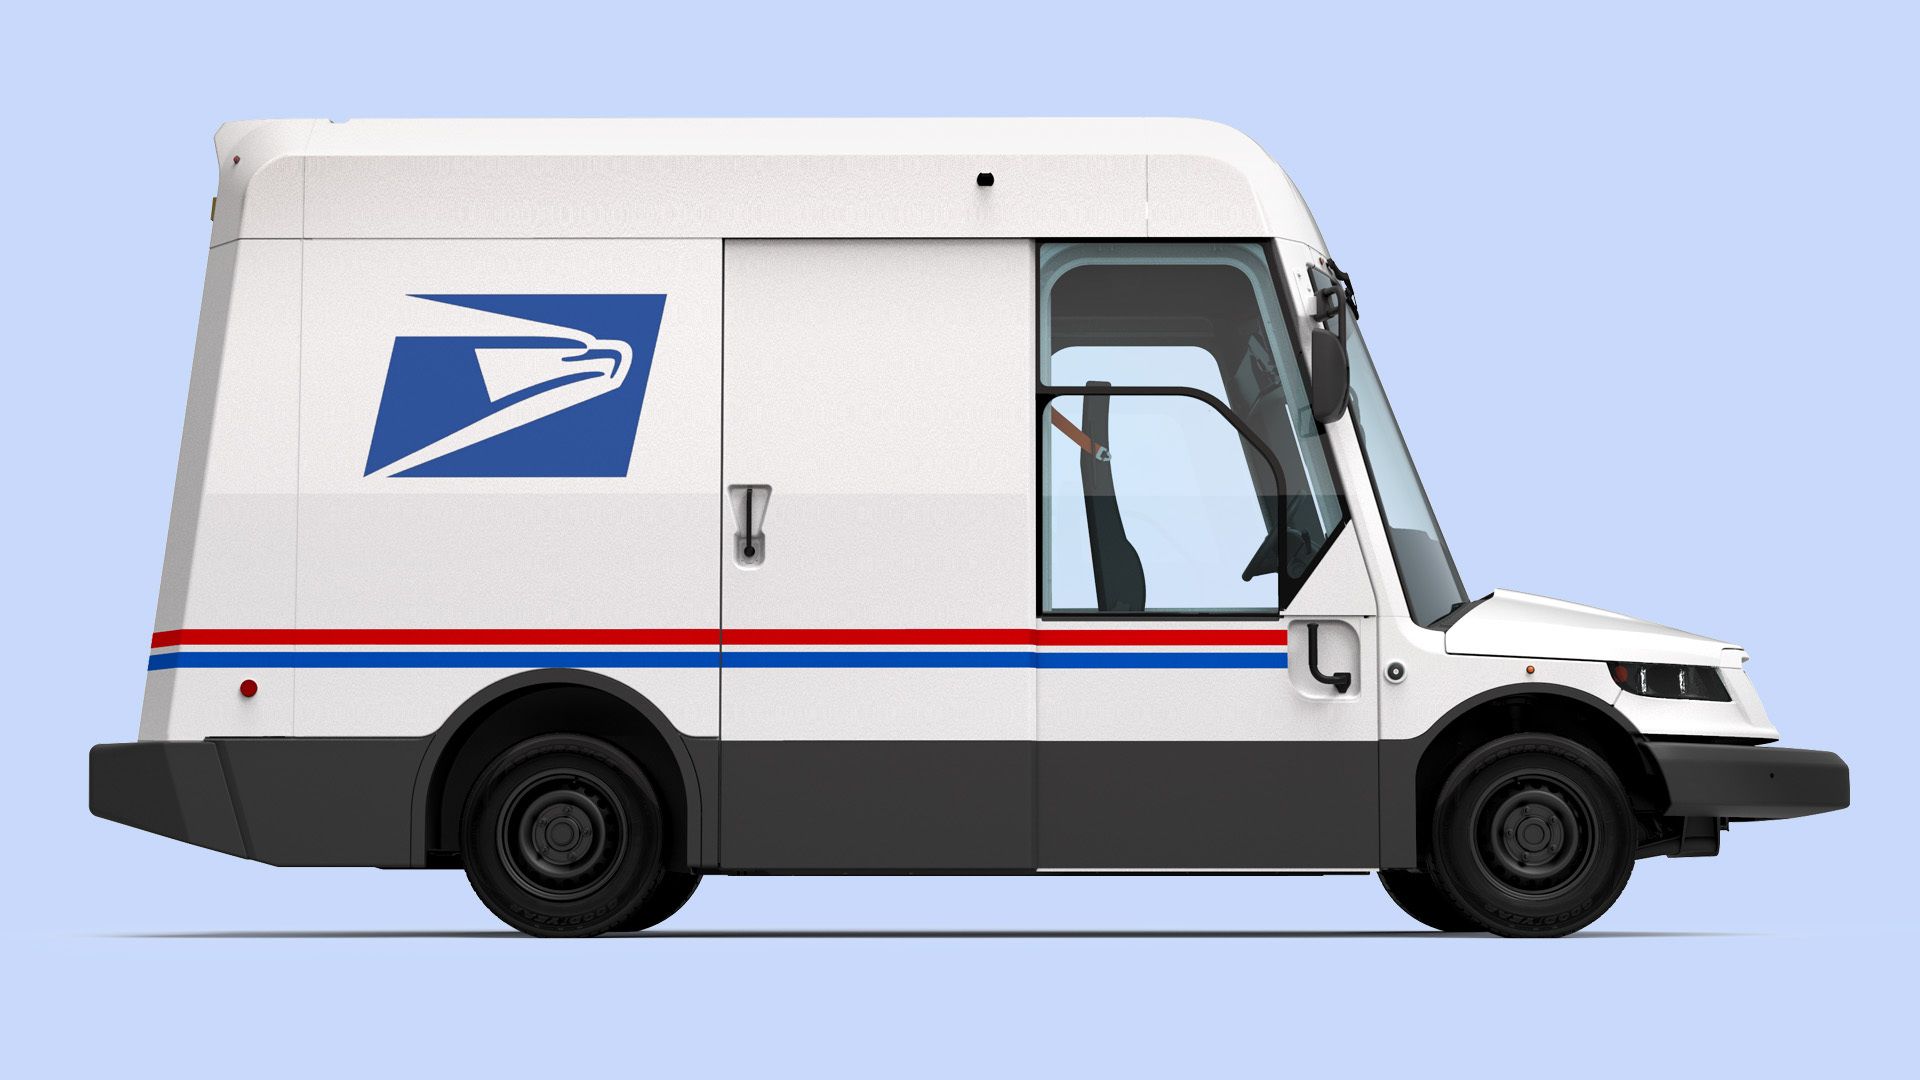 Image of the newly purchased US Postal truck, from OshKosh Defense